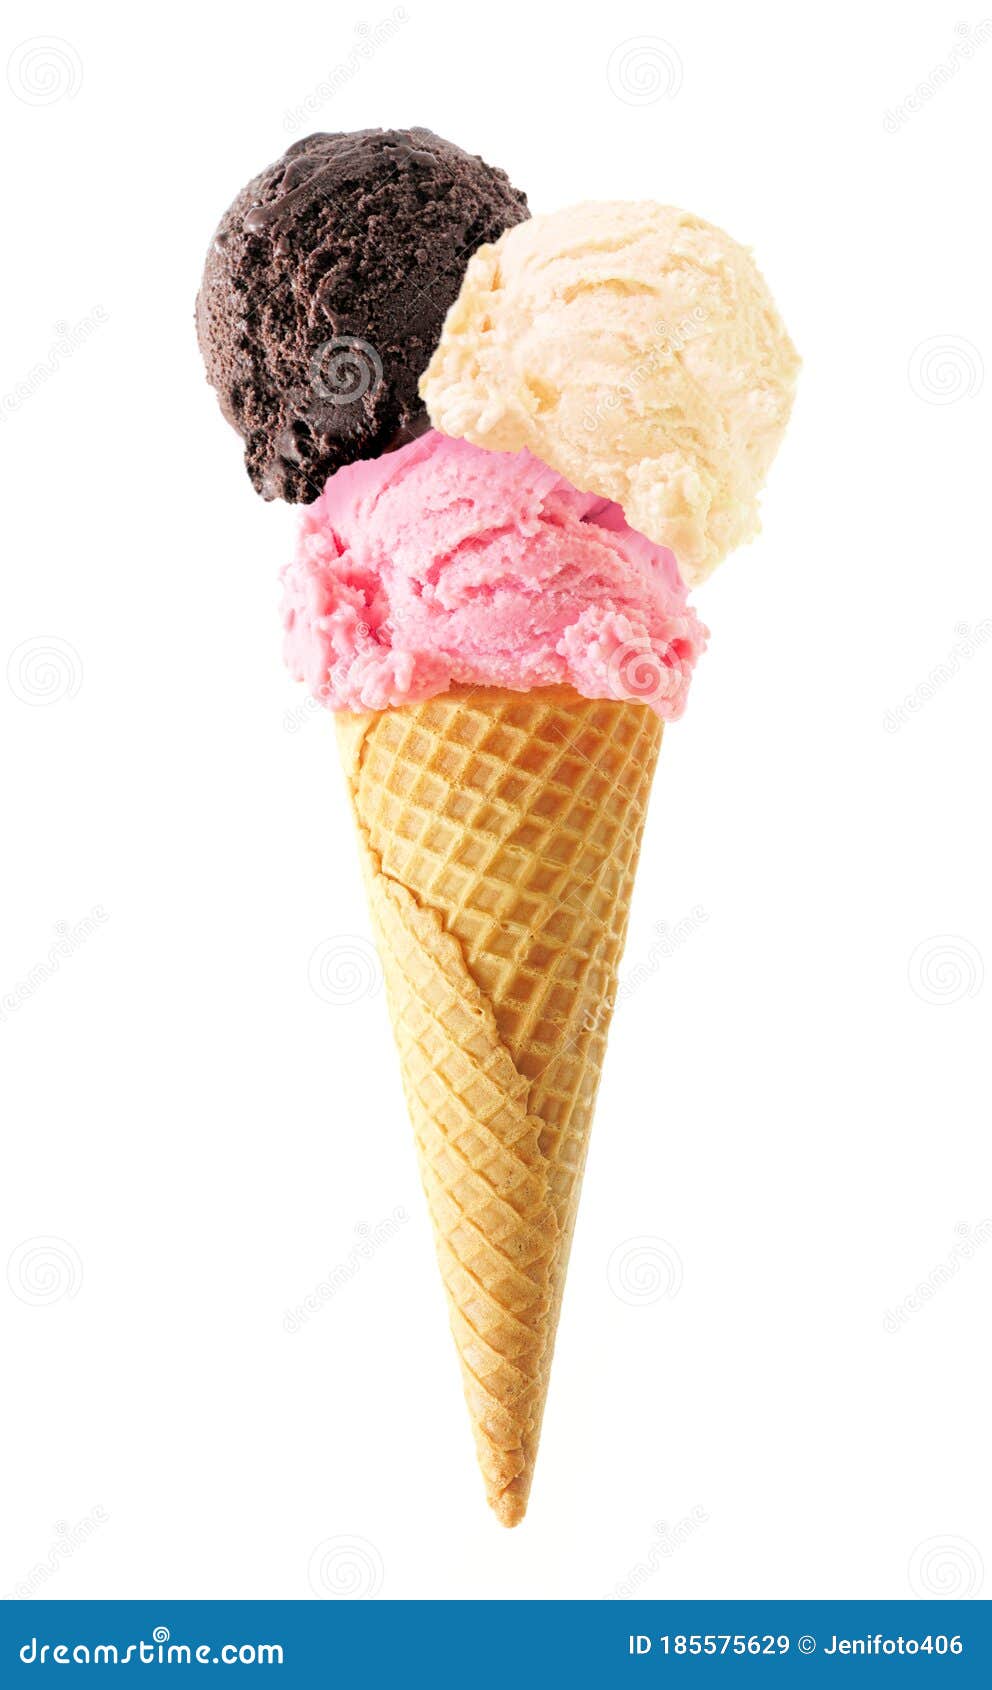 https://thumbs.dreamstime.com/z/triple-scoop-ice-cream-cone-isolated-white-background-chocolate-vanilla-strawberry-flavors-waffle-185575629.jpg